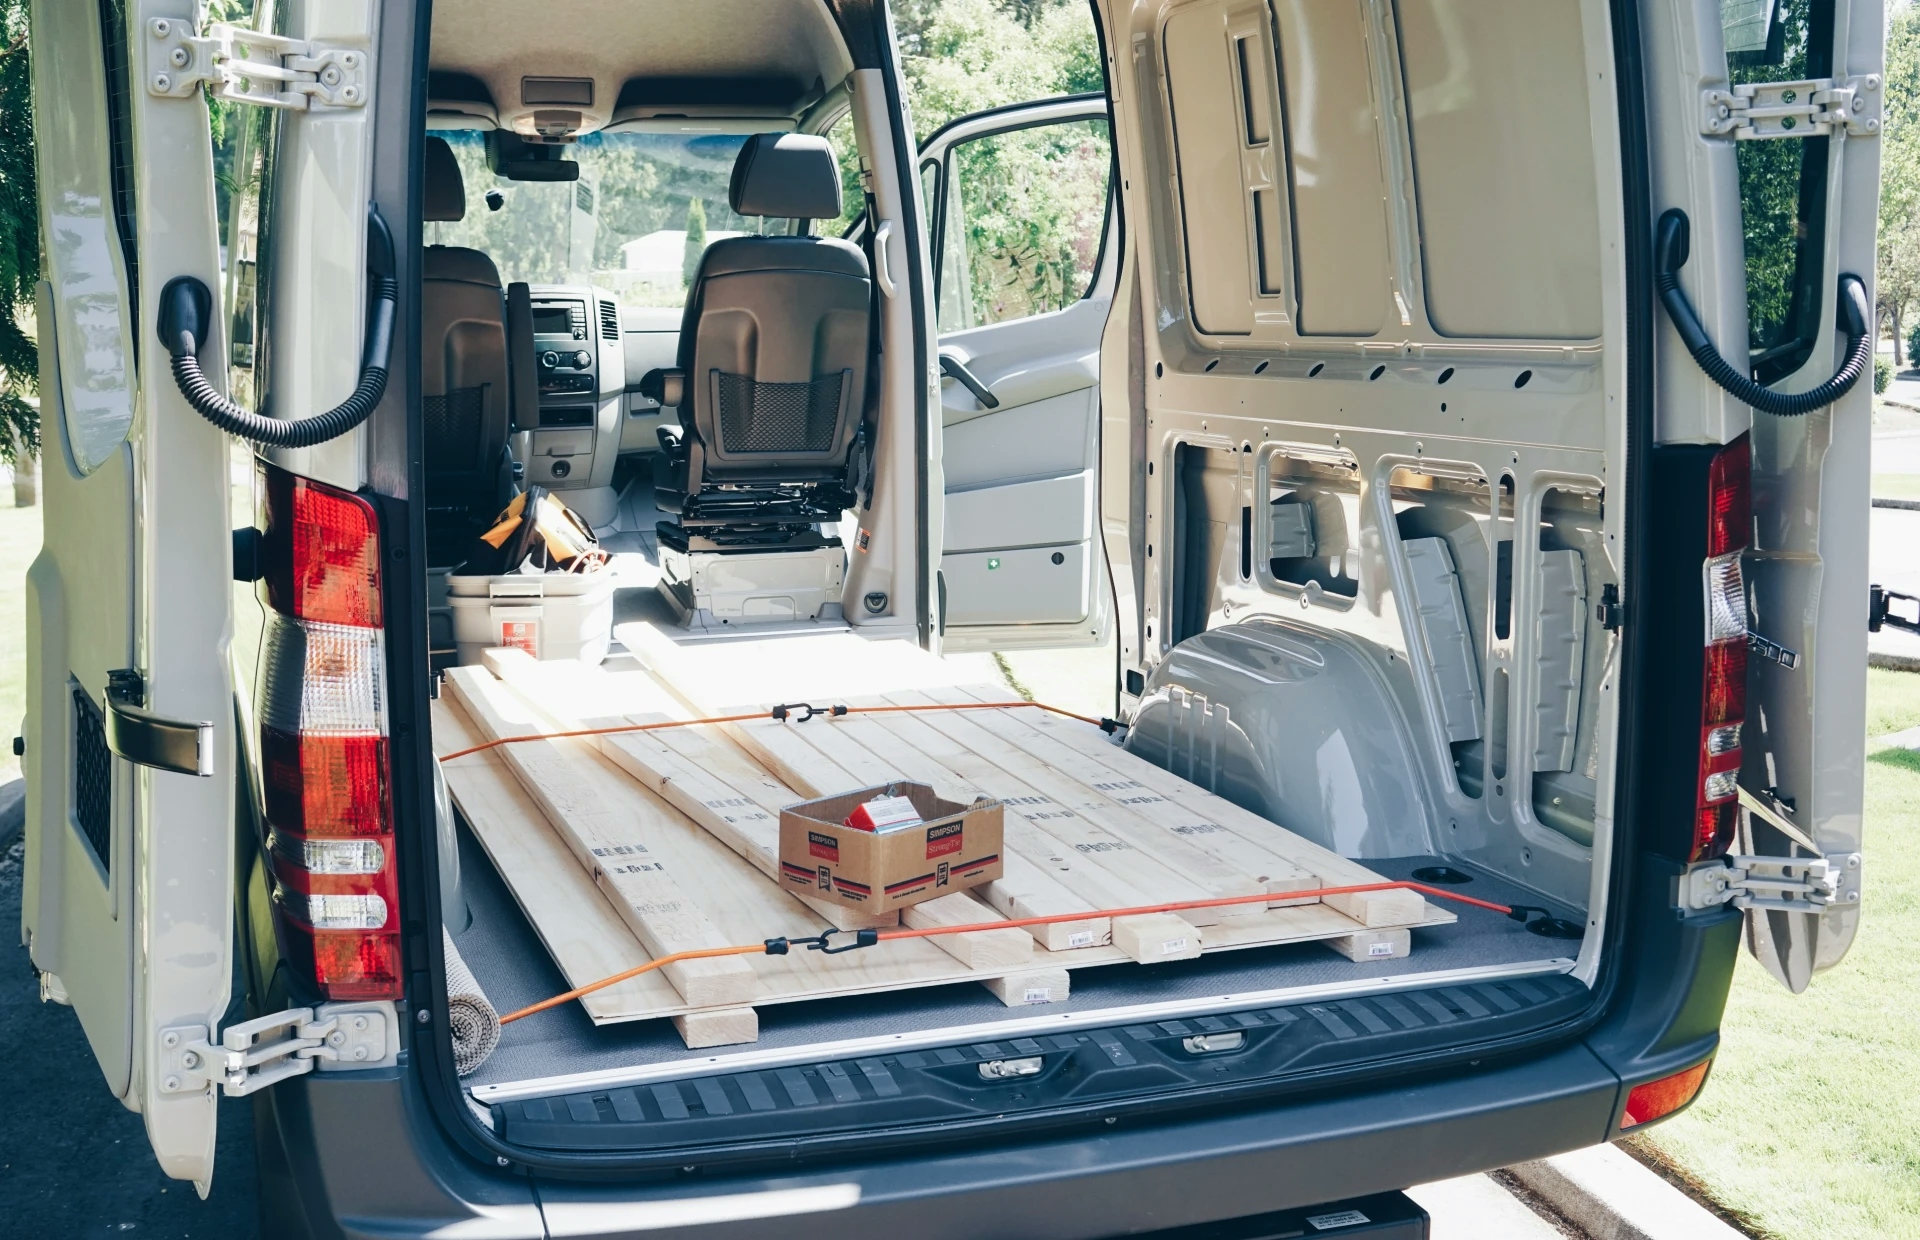 image showing the interior of the empty van with two by fours and plywood fresh from the hardware store